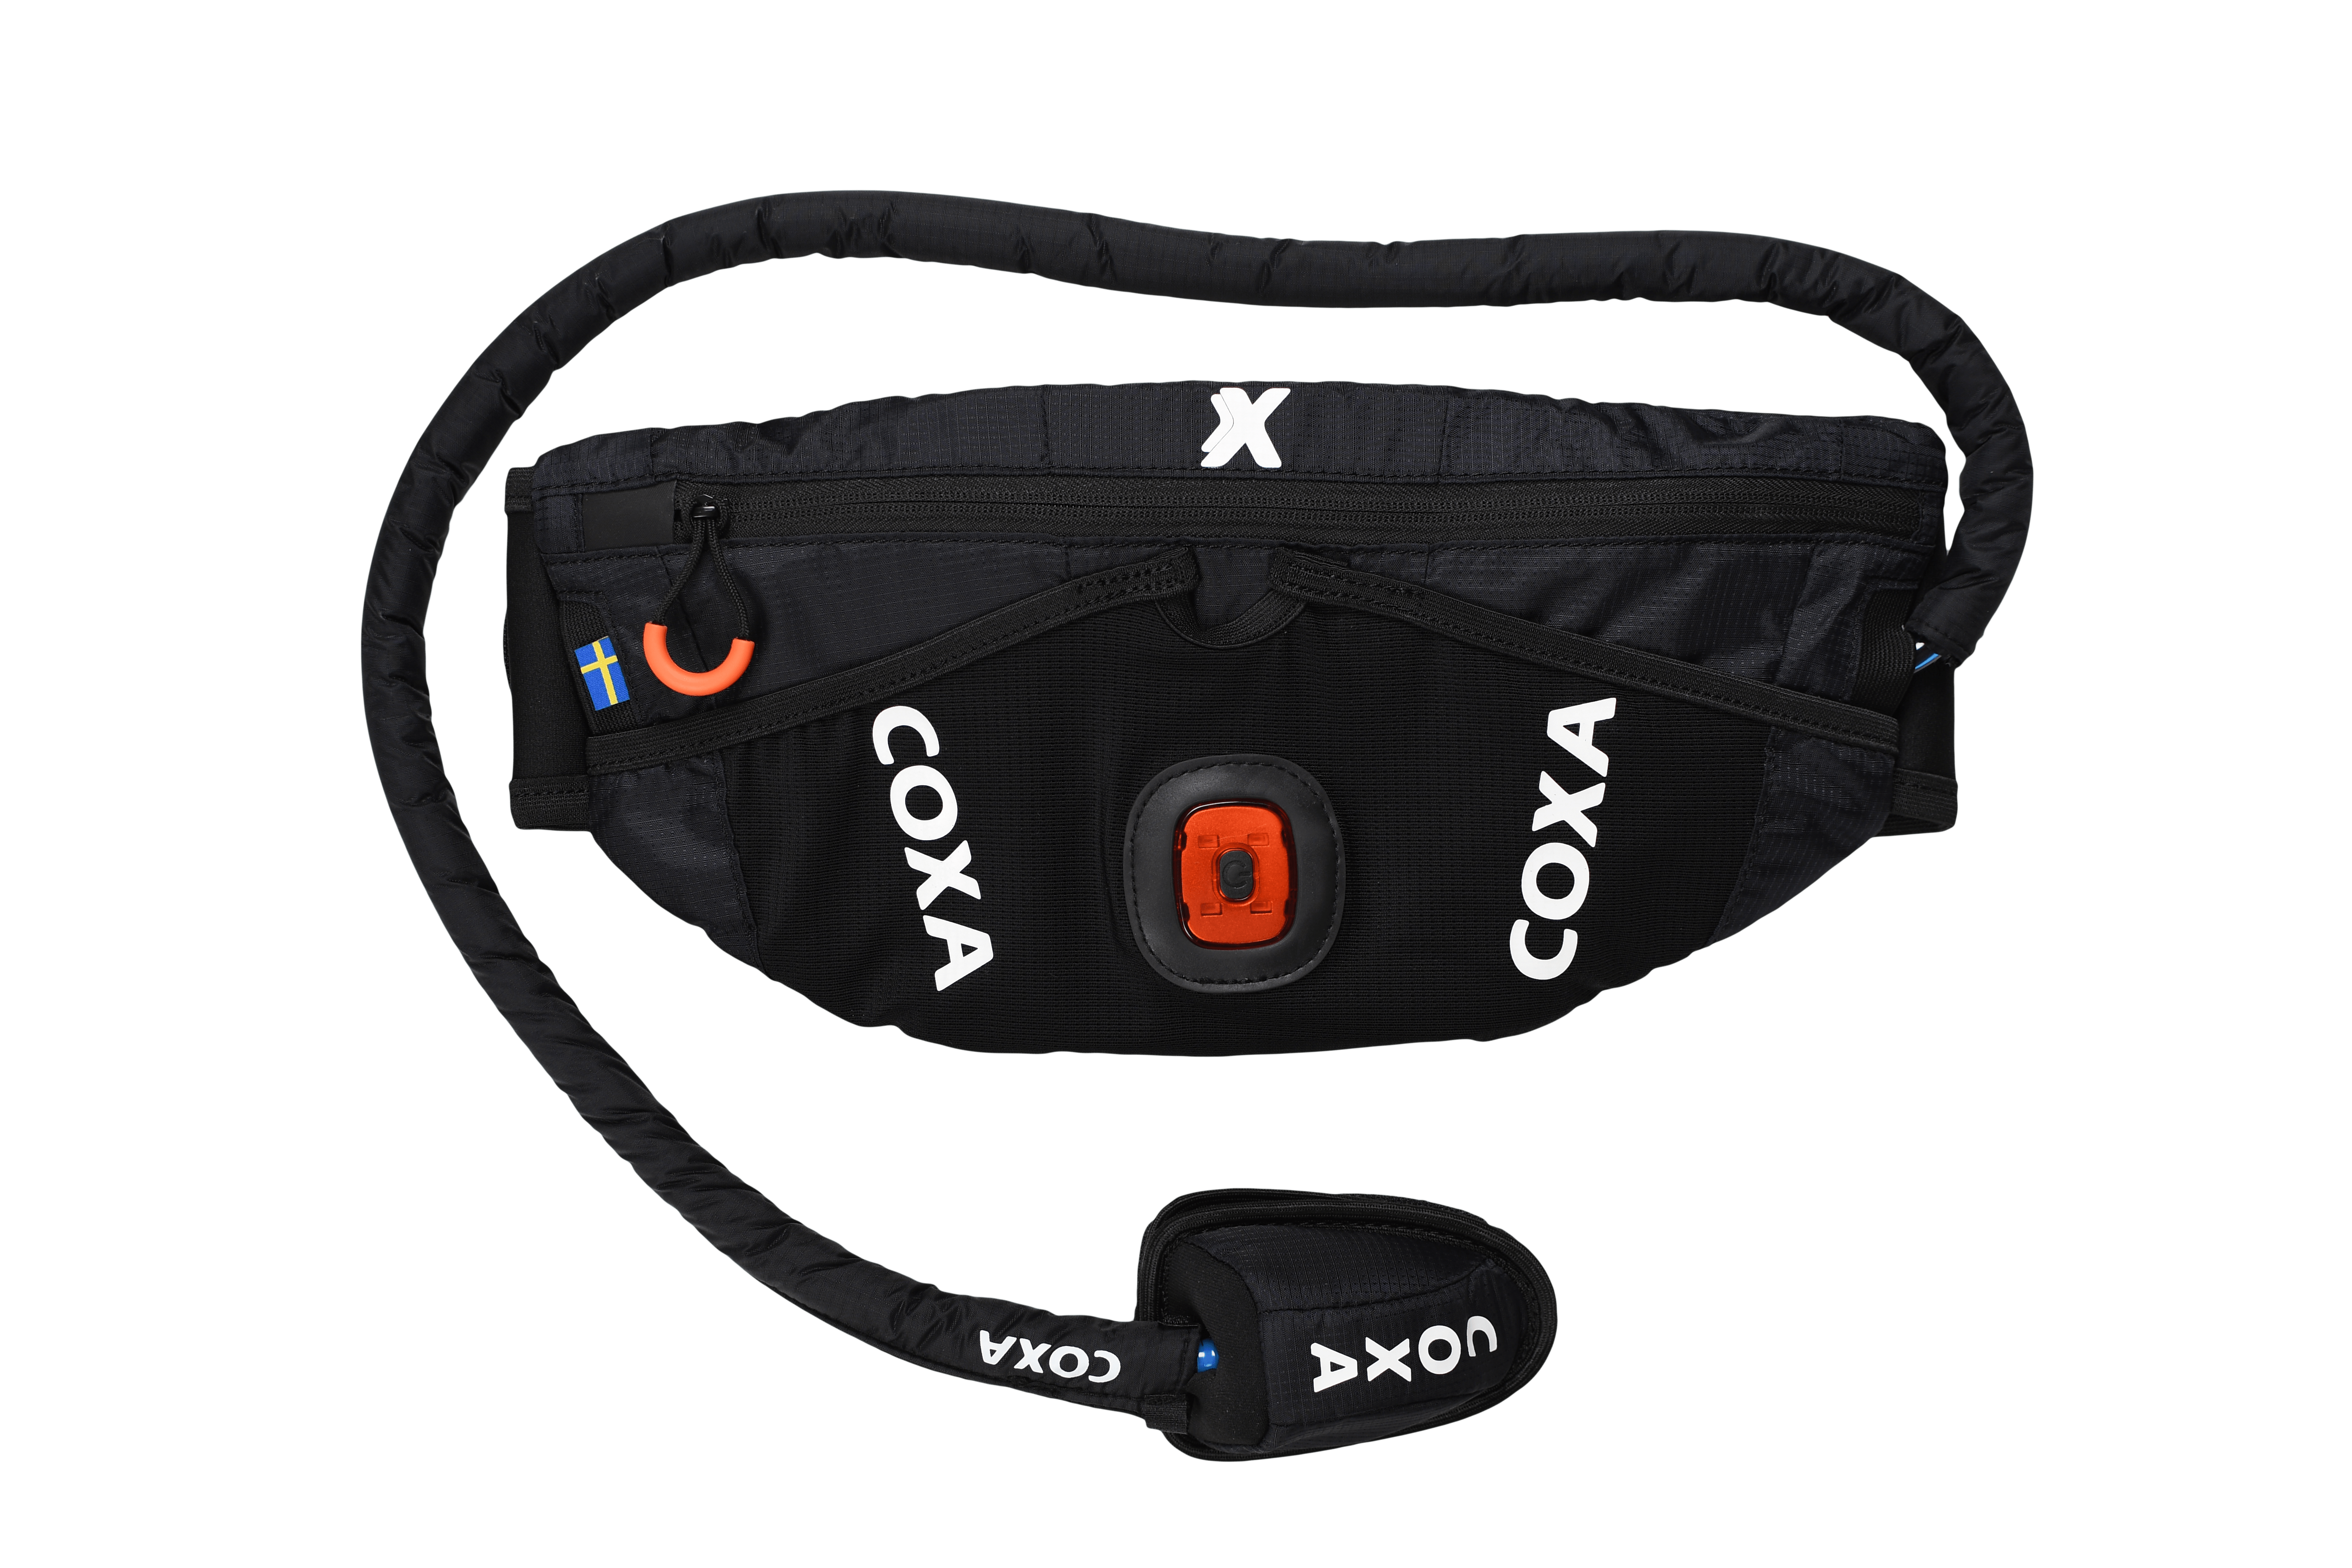 Klettpatches x 4 – Coxa Carry